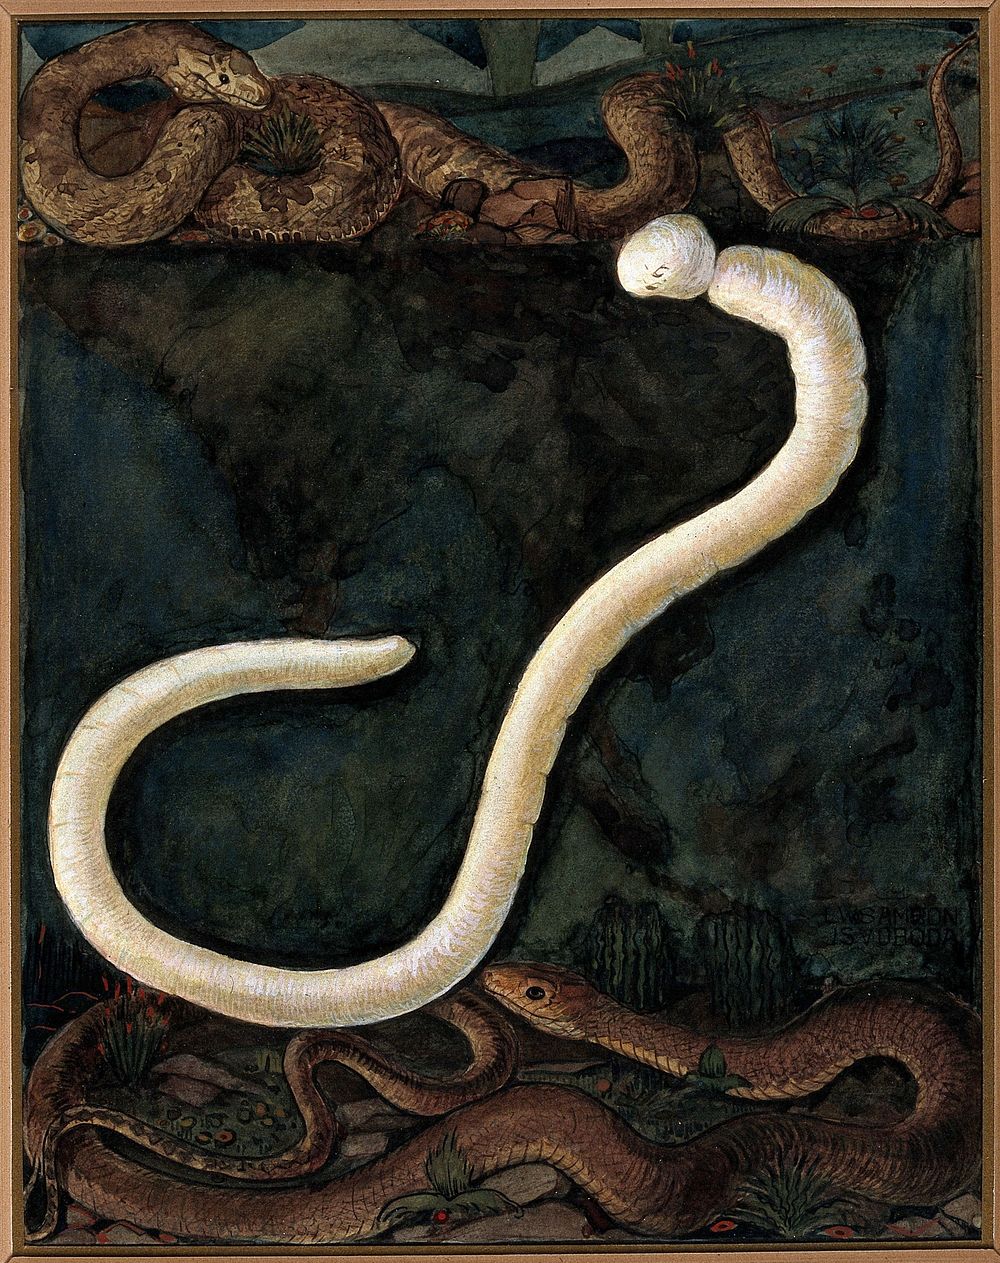 Parasites: a parasitical worm, shown much enlarged, with its hosts. Gouache painting by J. Svoboda after L.W. Sambon.